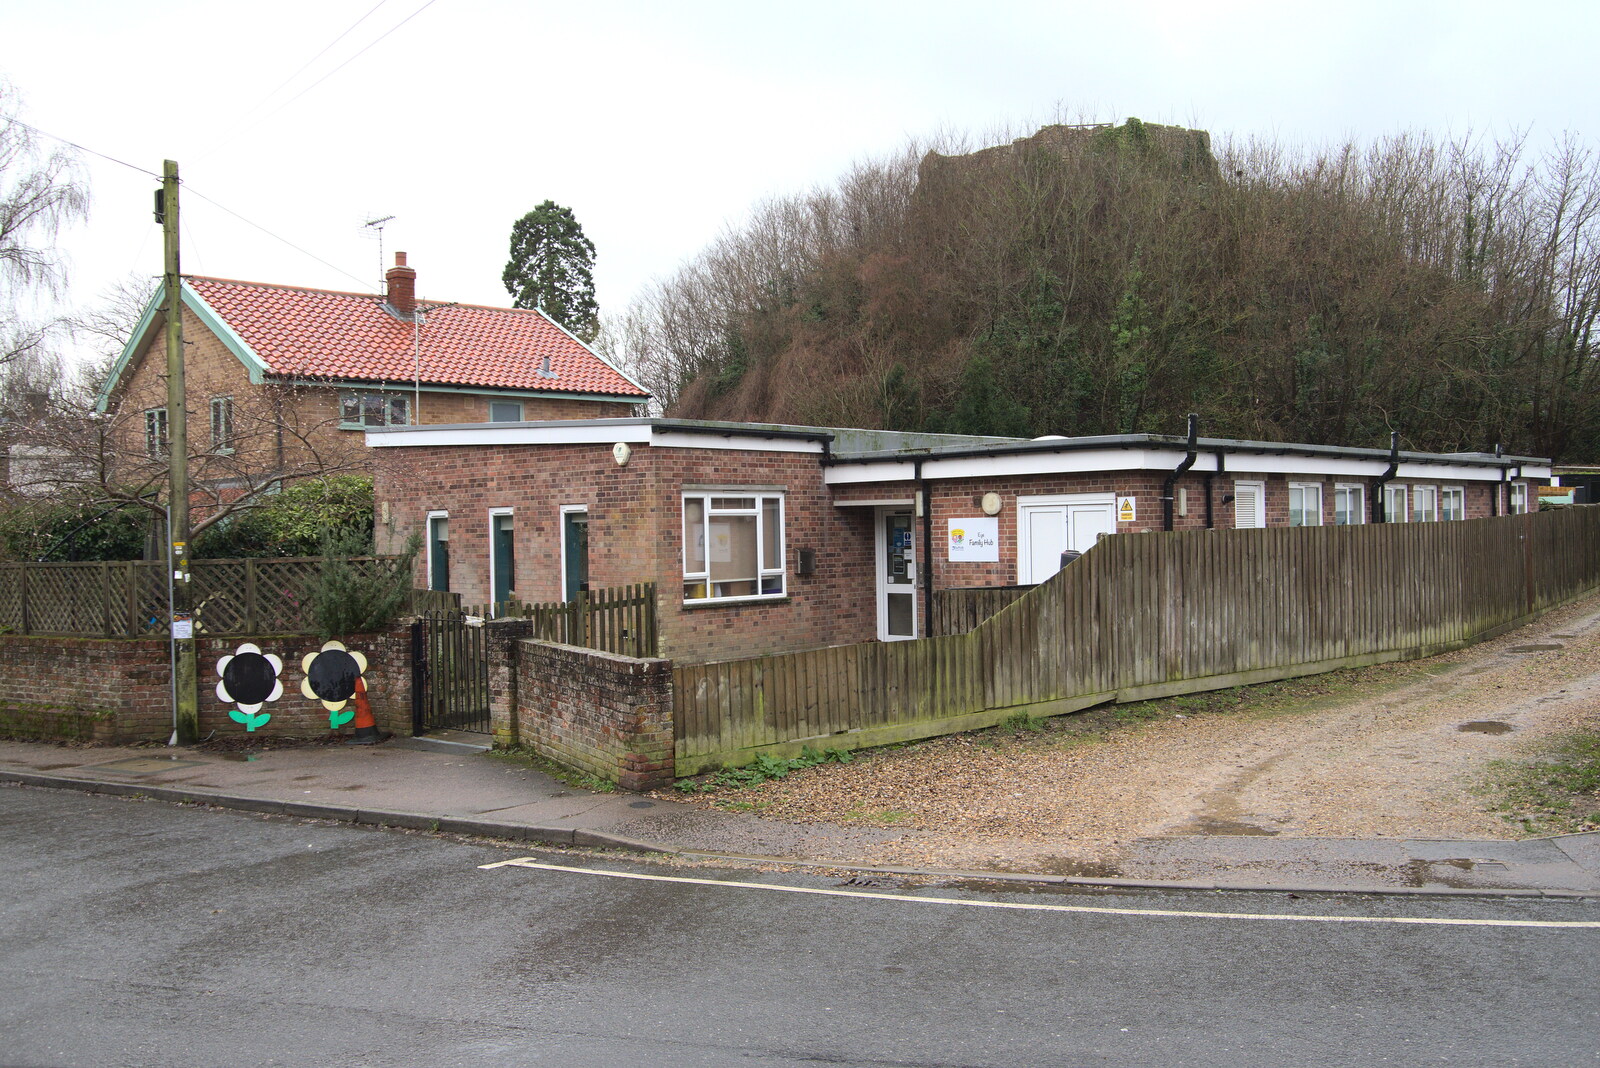 The former Eye Sure Start/children's centre from New Year's Day, Brome, Suffolk - 1st January 2022